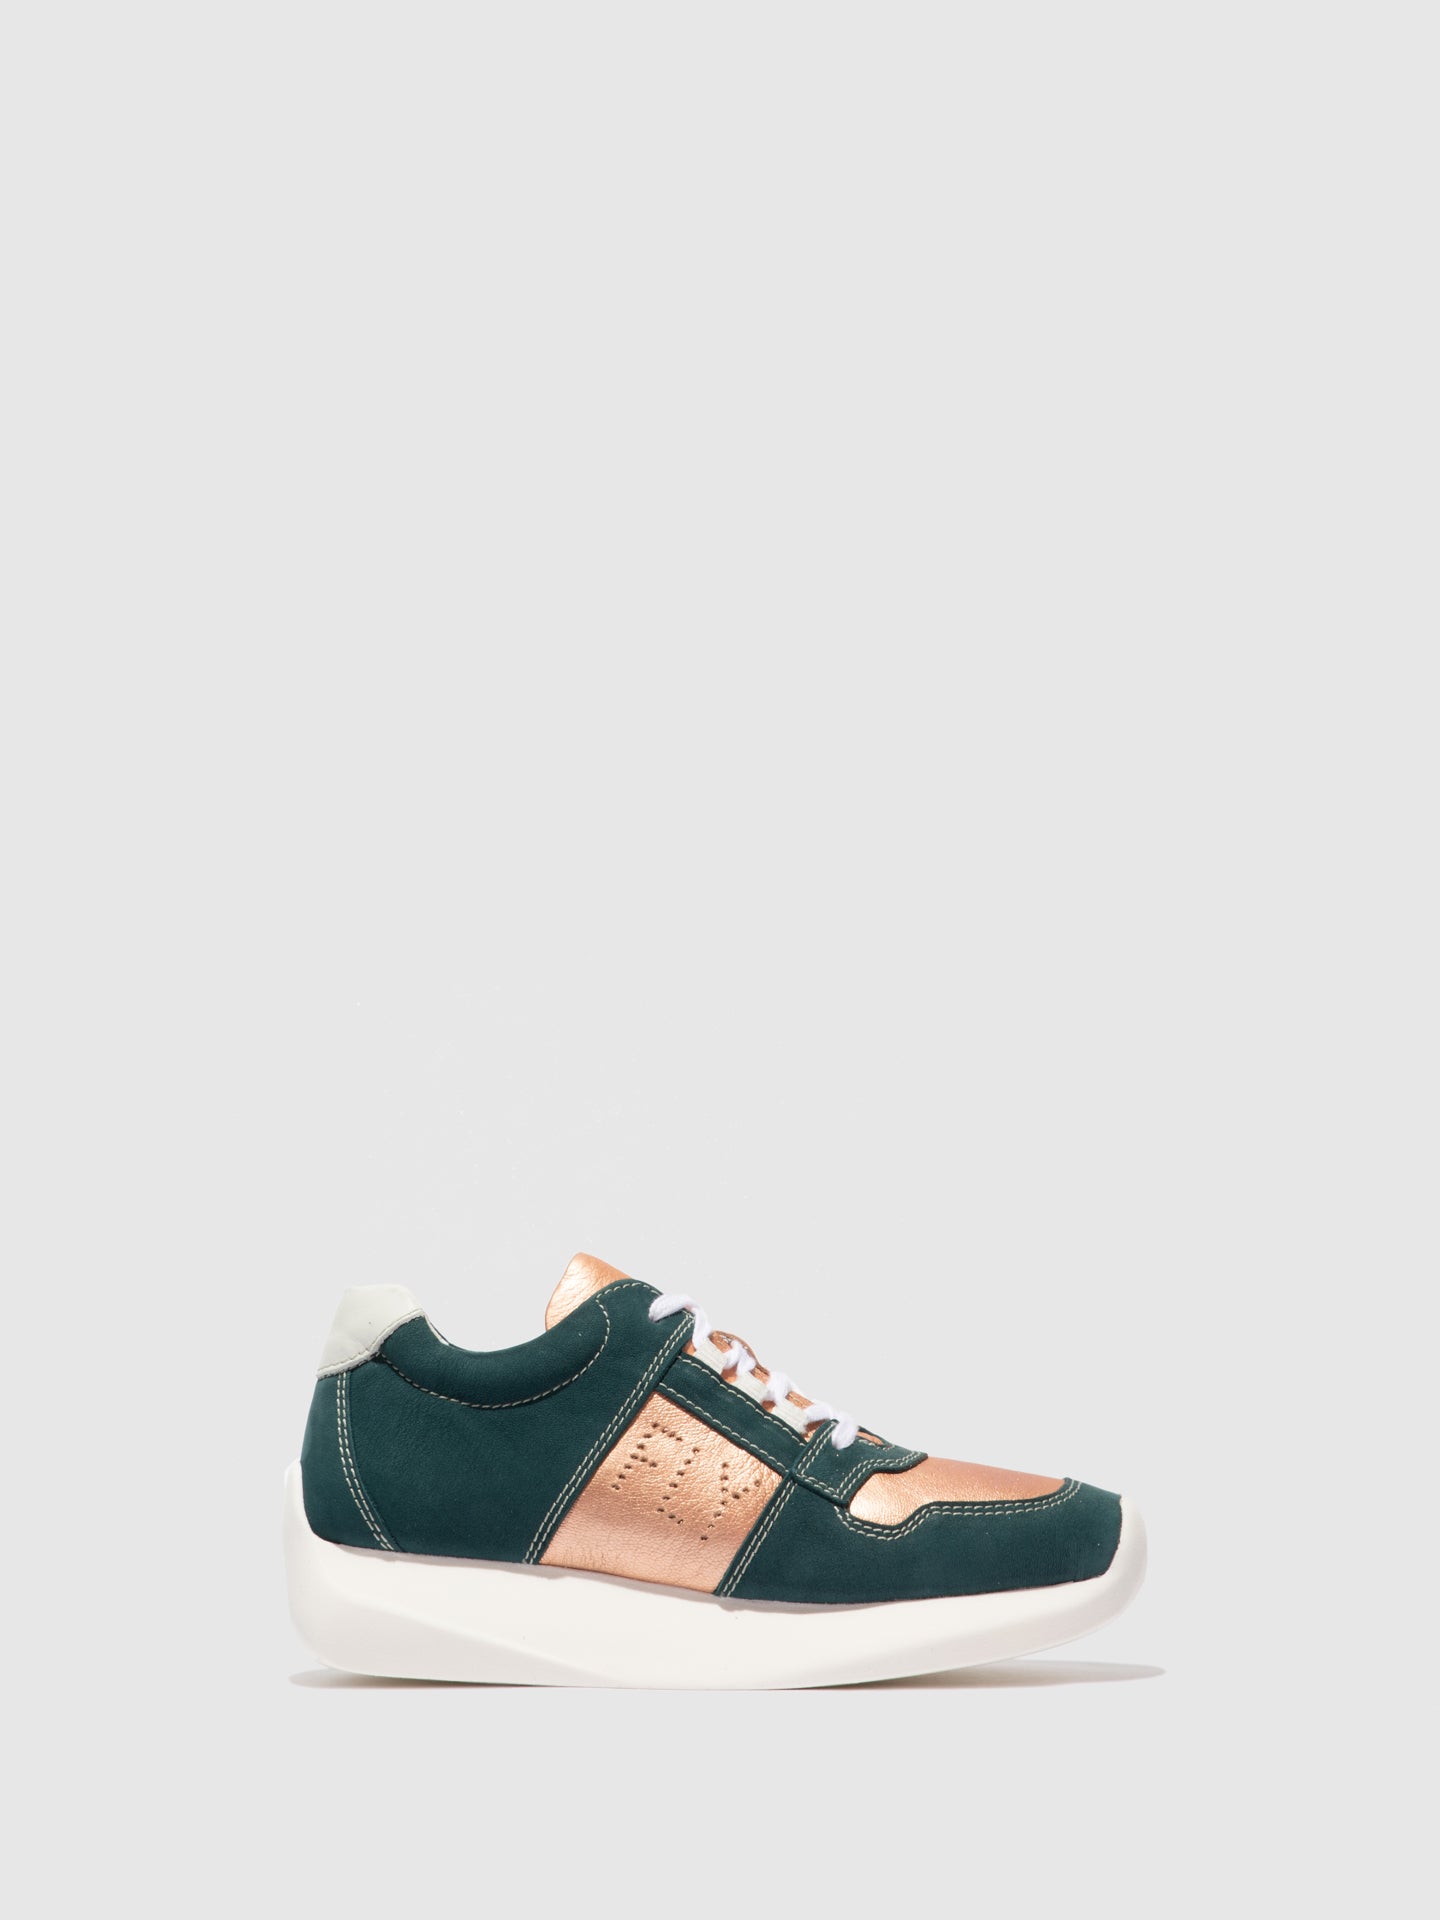 Fly London Lace-up Trainers LOTT761FLY CUPIDO/IDRA  TEAL/BLUSH GOLD